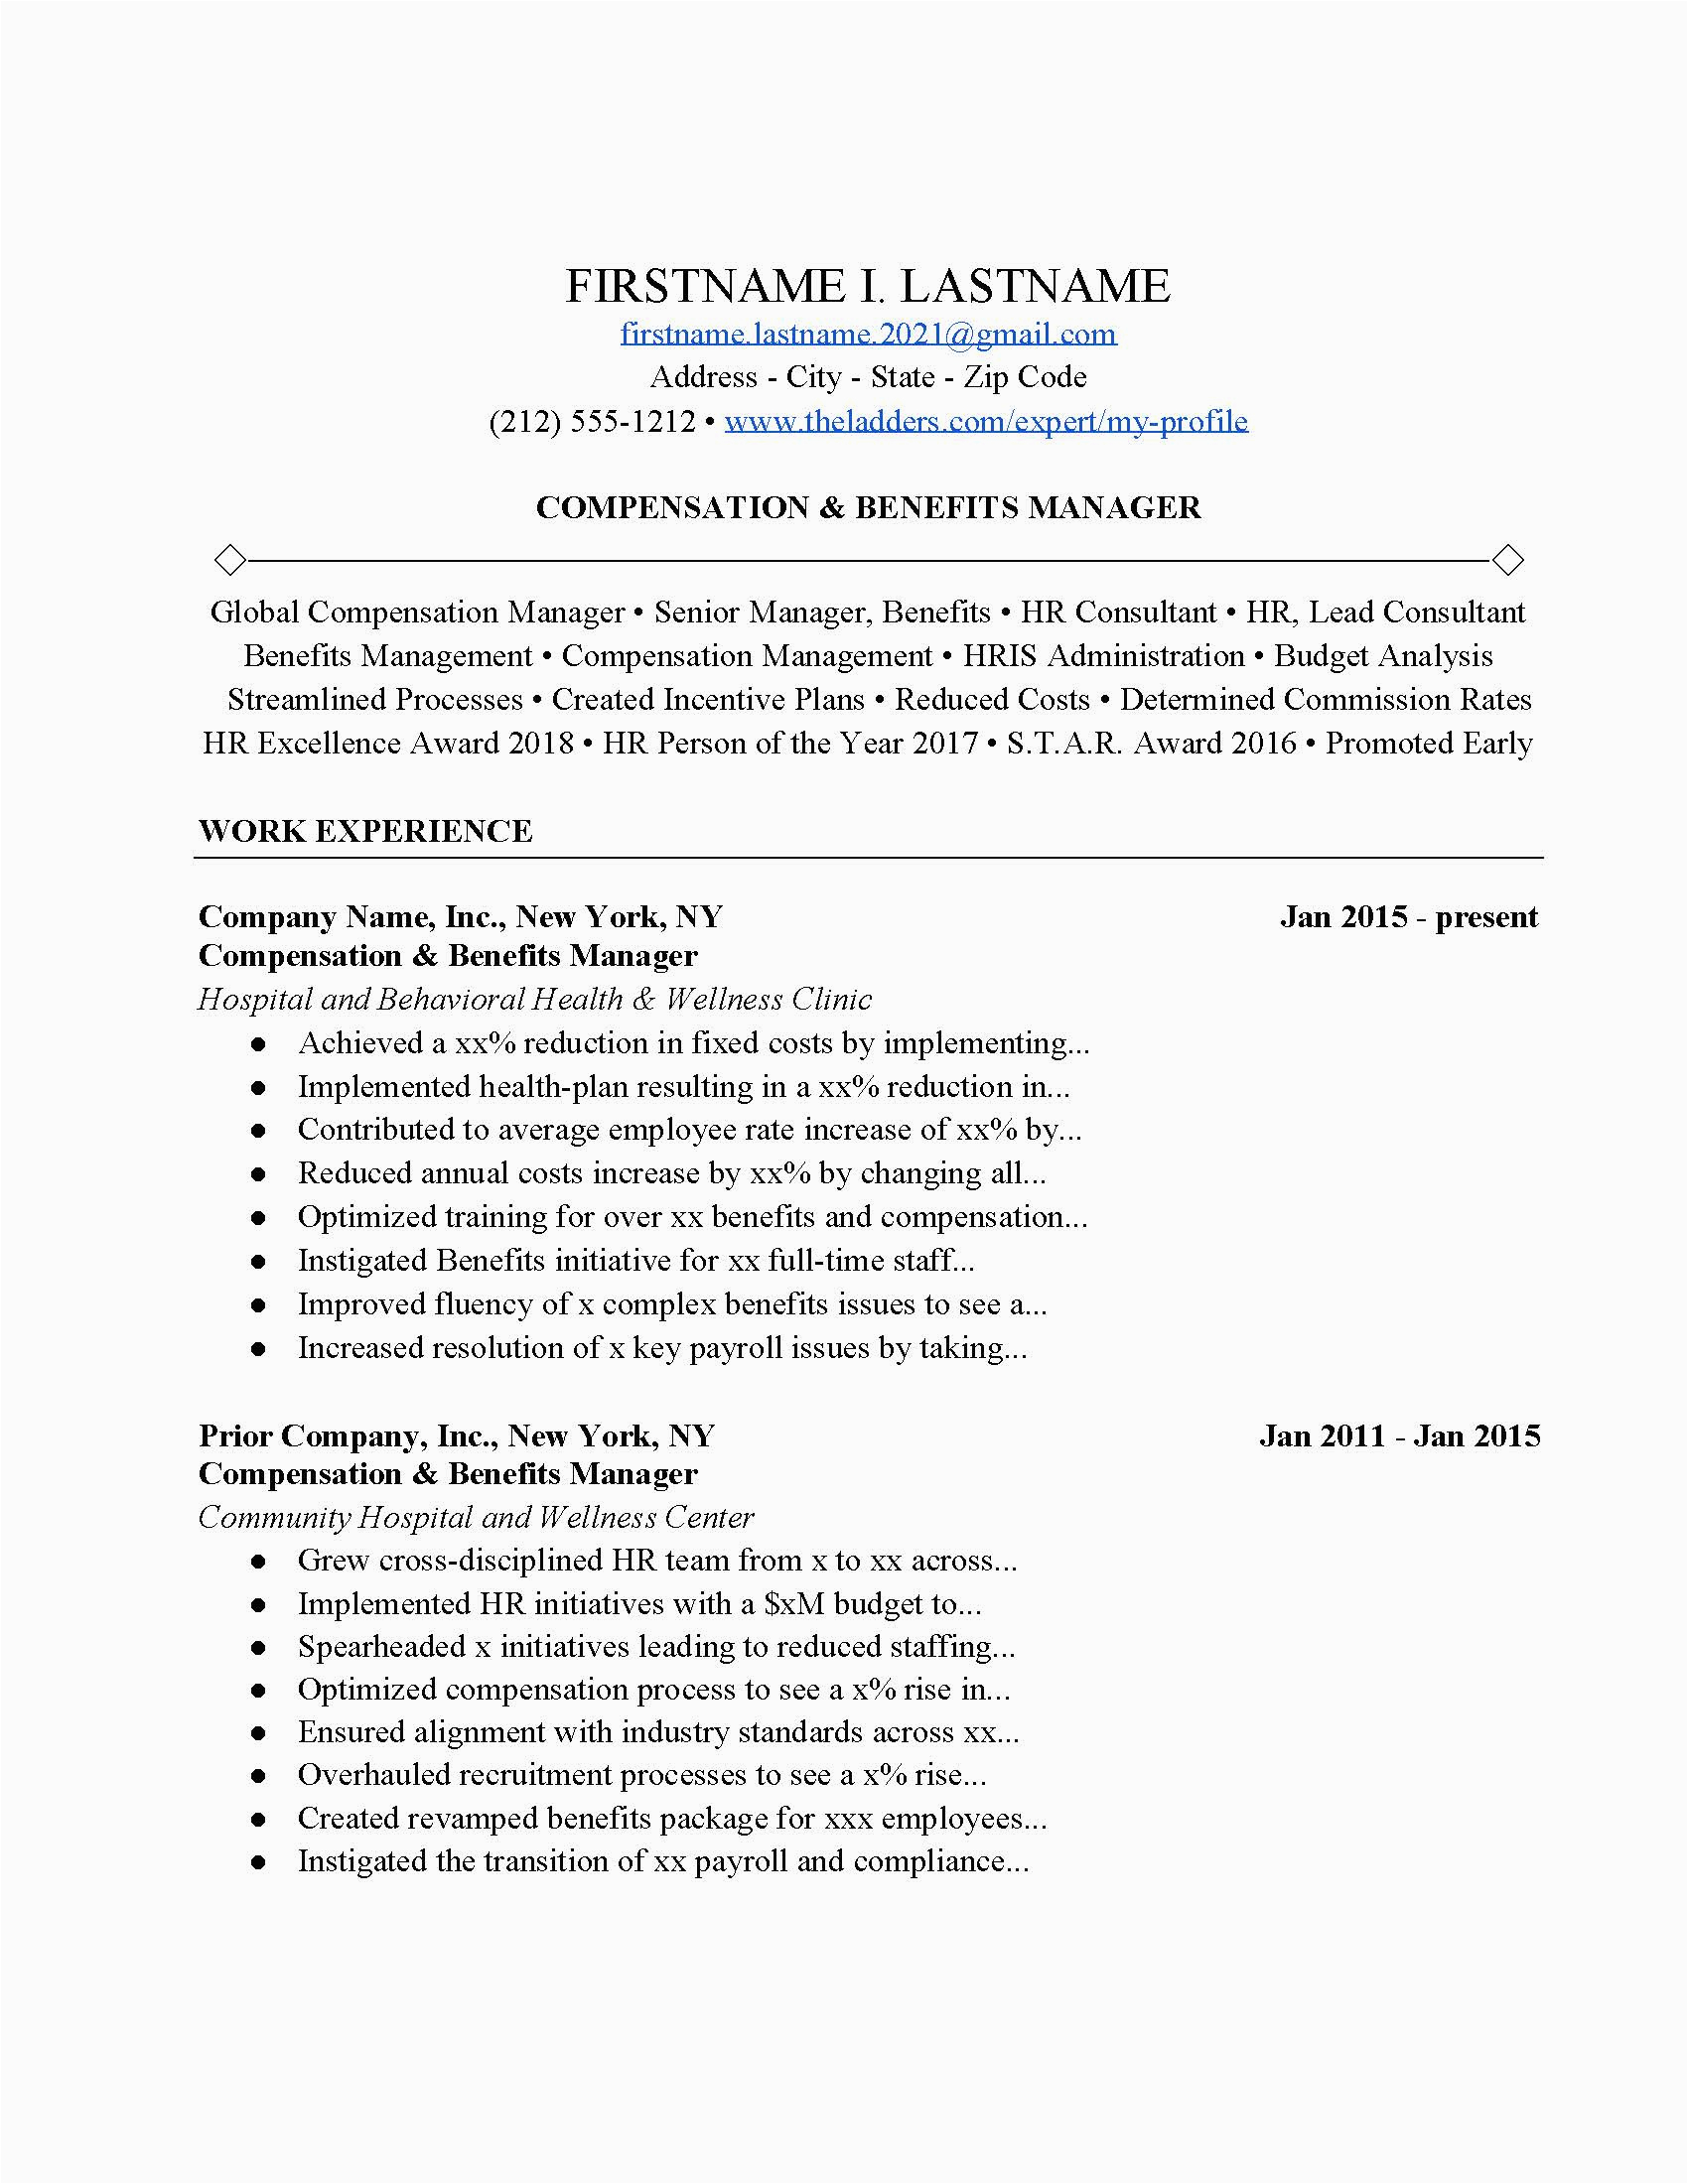 Compensation and Benefits Manager Resume Sample Pensation and Benefits Manager Resume Example